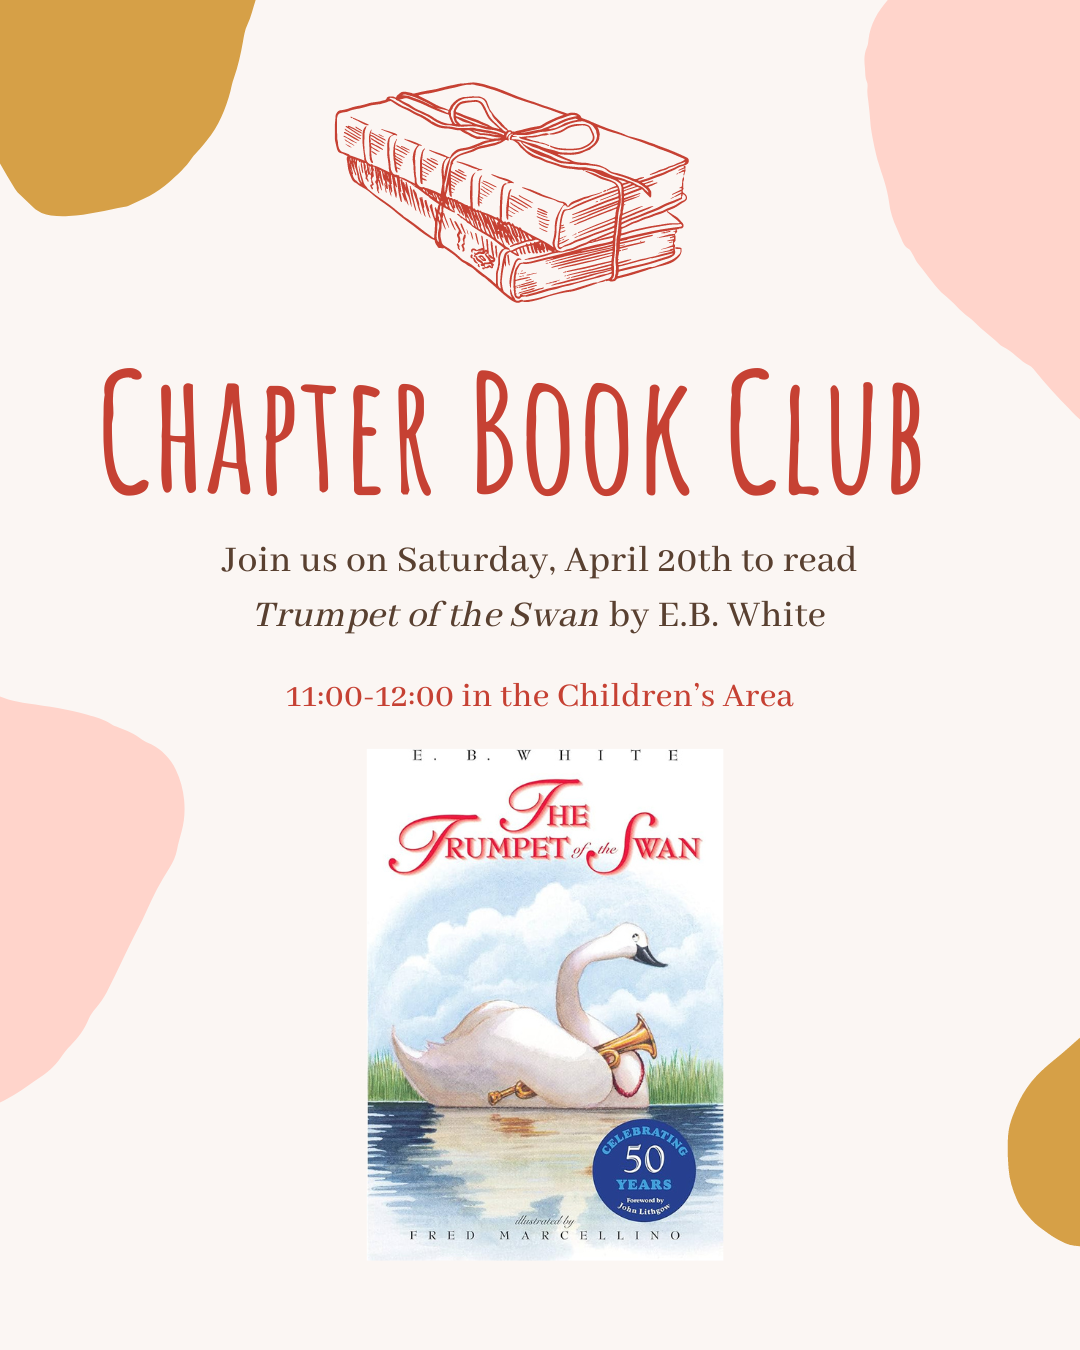 Chapter Book Club April 20th 11:00